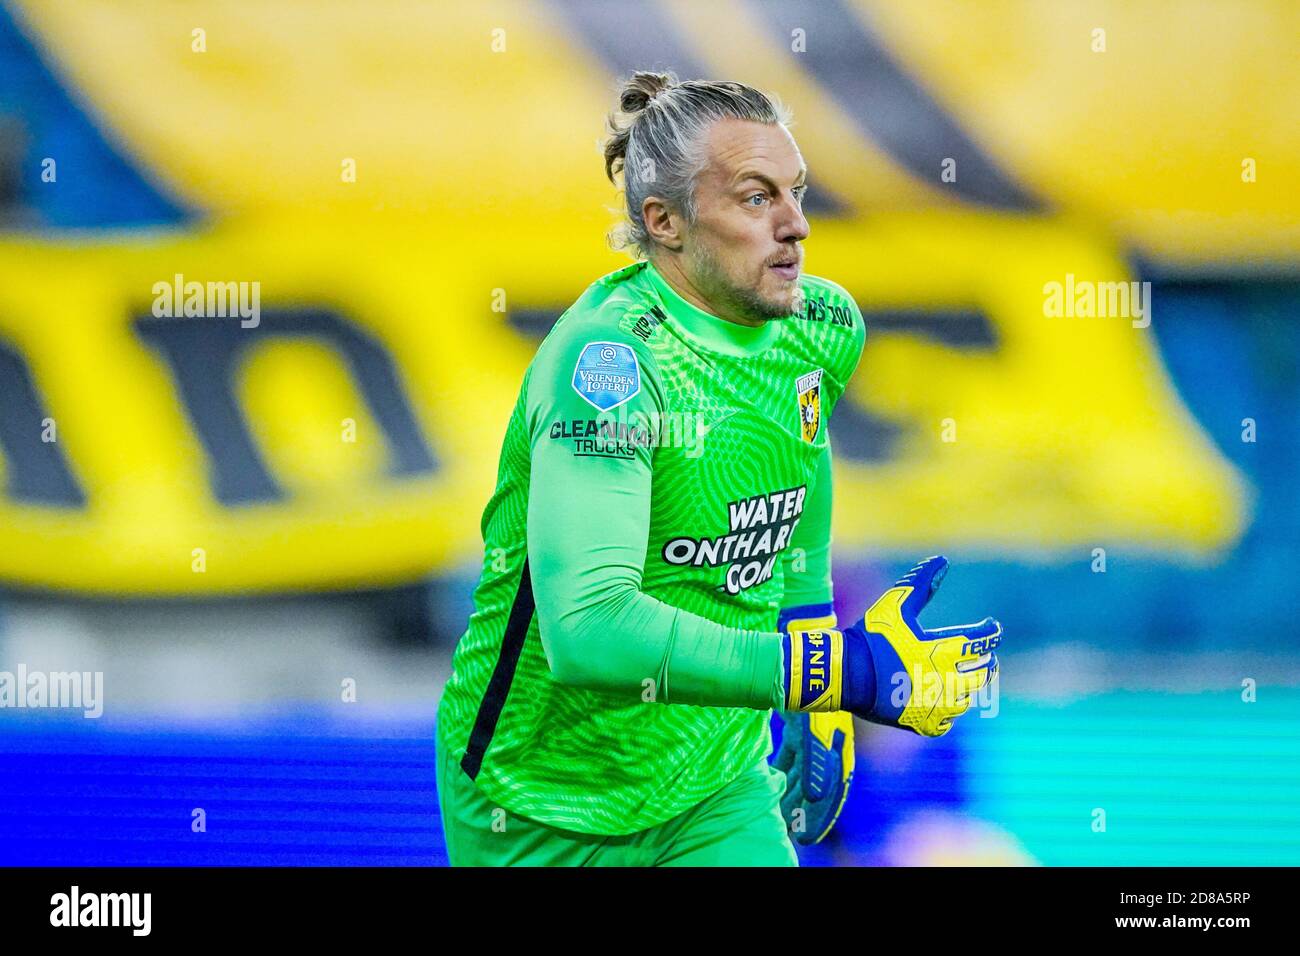 Remko Pasveer of Vitesse during the Netherlands championship Eredivisie football match between Vitesse and PSV on October 25, 2020 at Gelredome Stad C Stock Photo